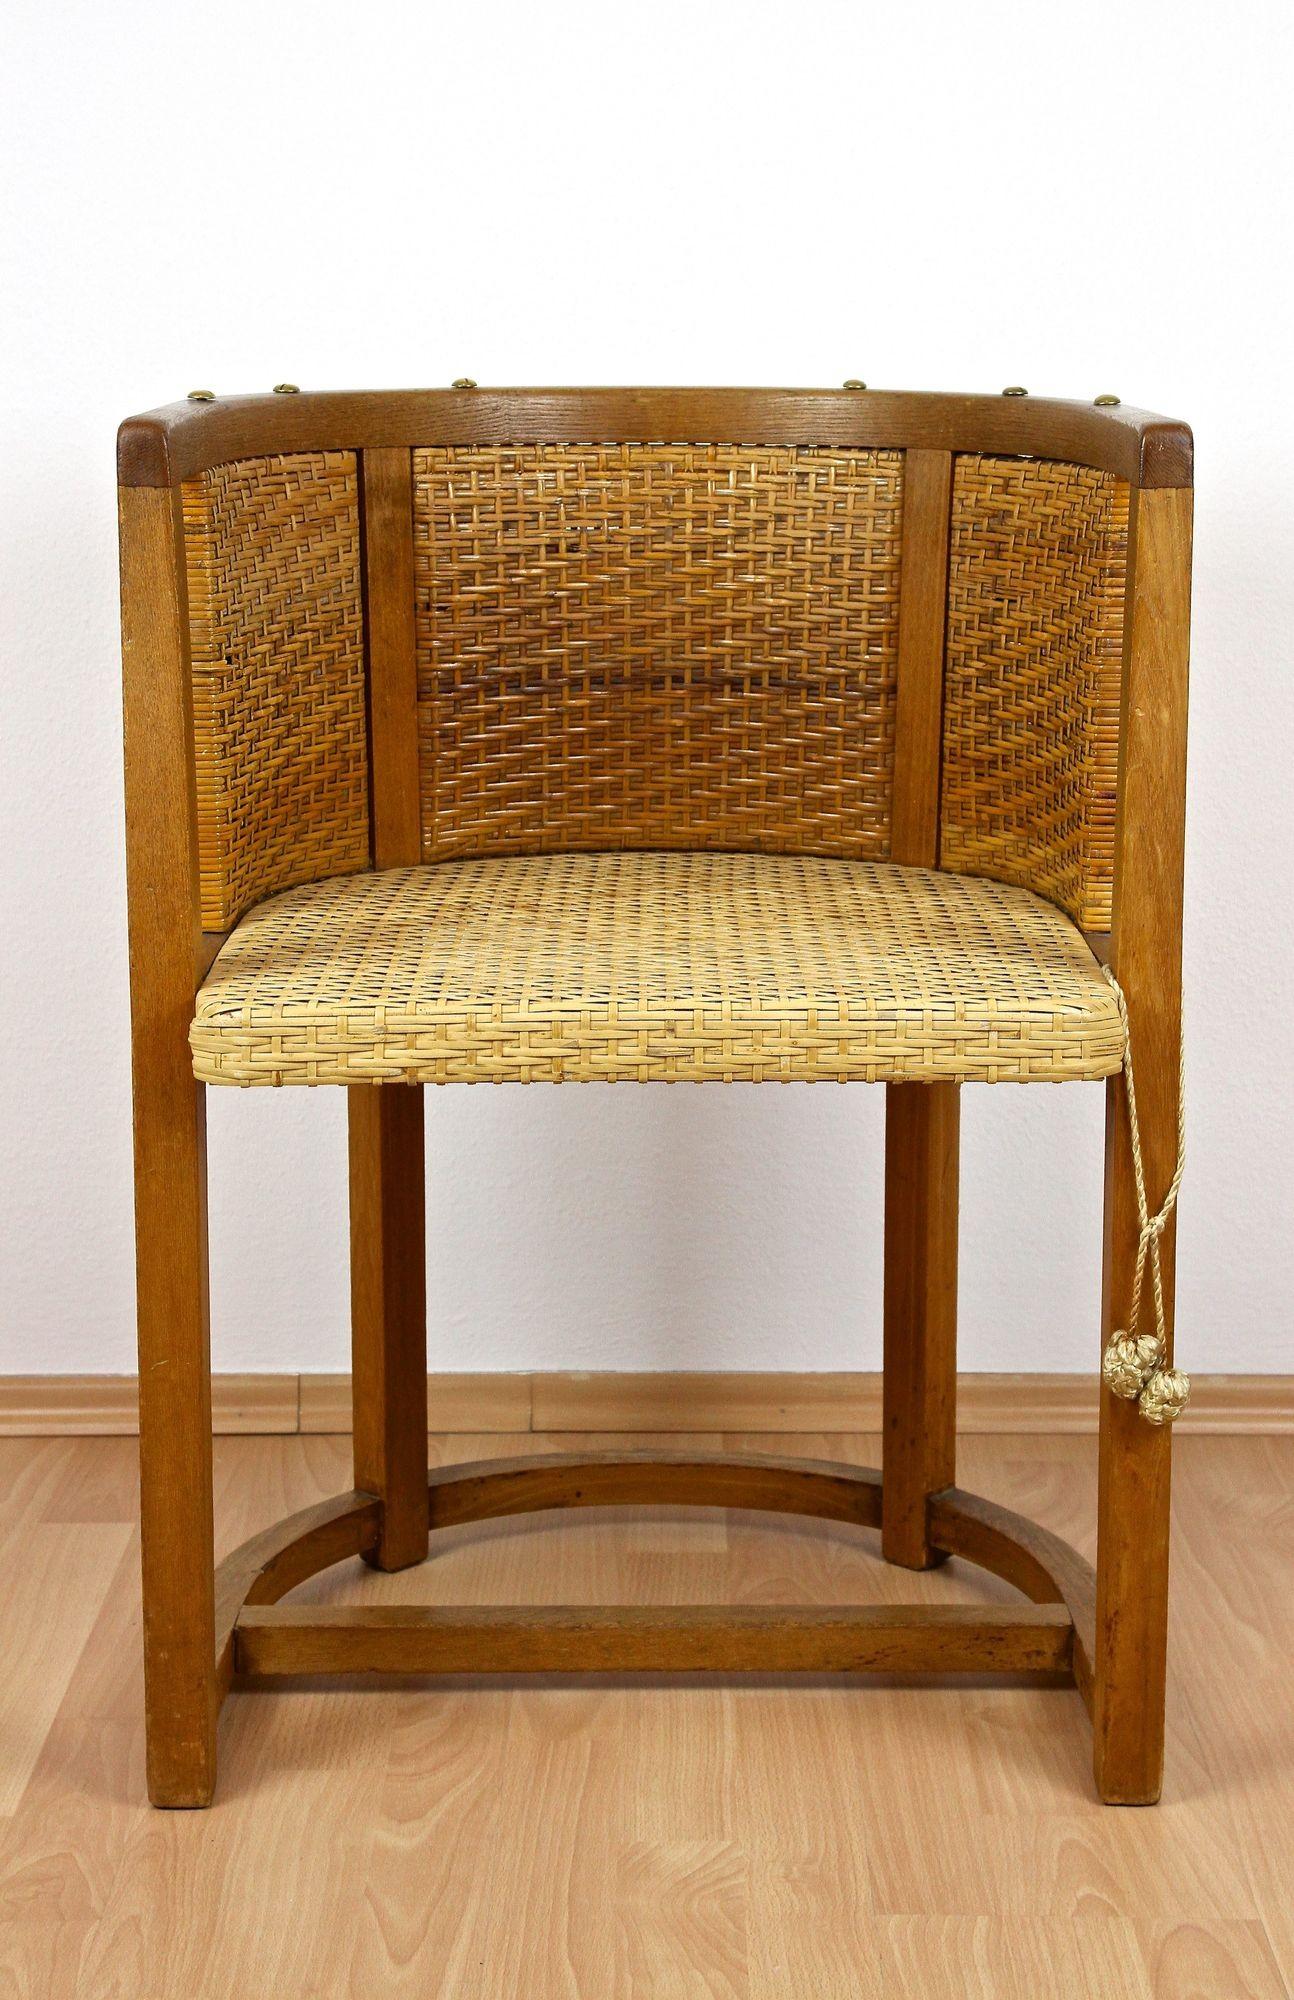 Hand-Crafted 20th Century Art Nouveau Elmwood Armchair 1307 by Prag-Rudniker, AT ca. 1903 For Sale